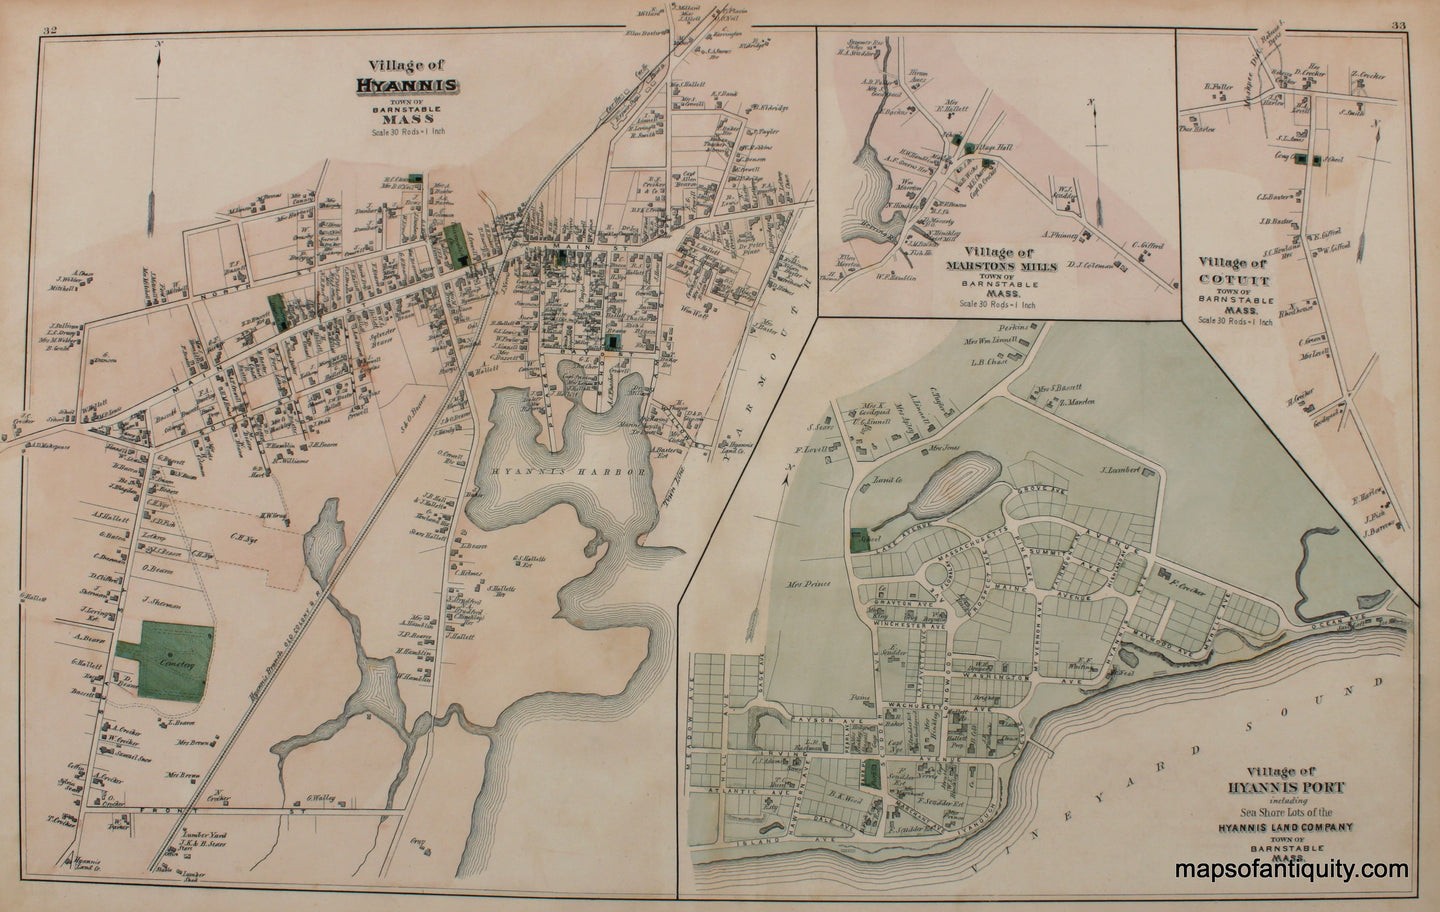 Reproduction-Villages-of-Hyannis-Hyannis-Port-Marstons-Mills-Cotuit-pp.-32-33-Town-and-Village-Maps-Atlas-of-Barnstable-County-Walker-1880.---Reproduction---Reproductions-Cape-Cod-and-Islands-Reproduction--Maps-Of-Antiquity